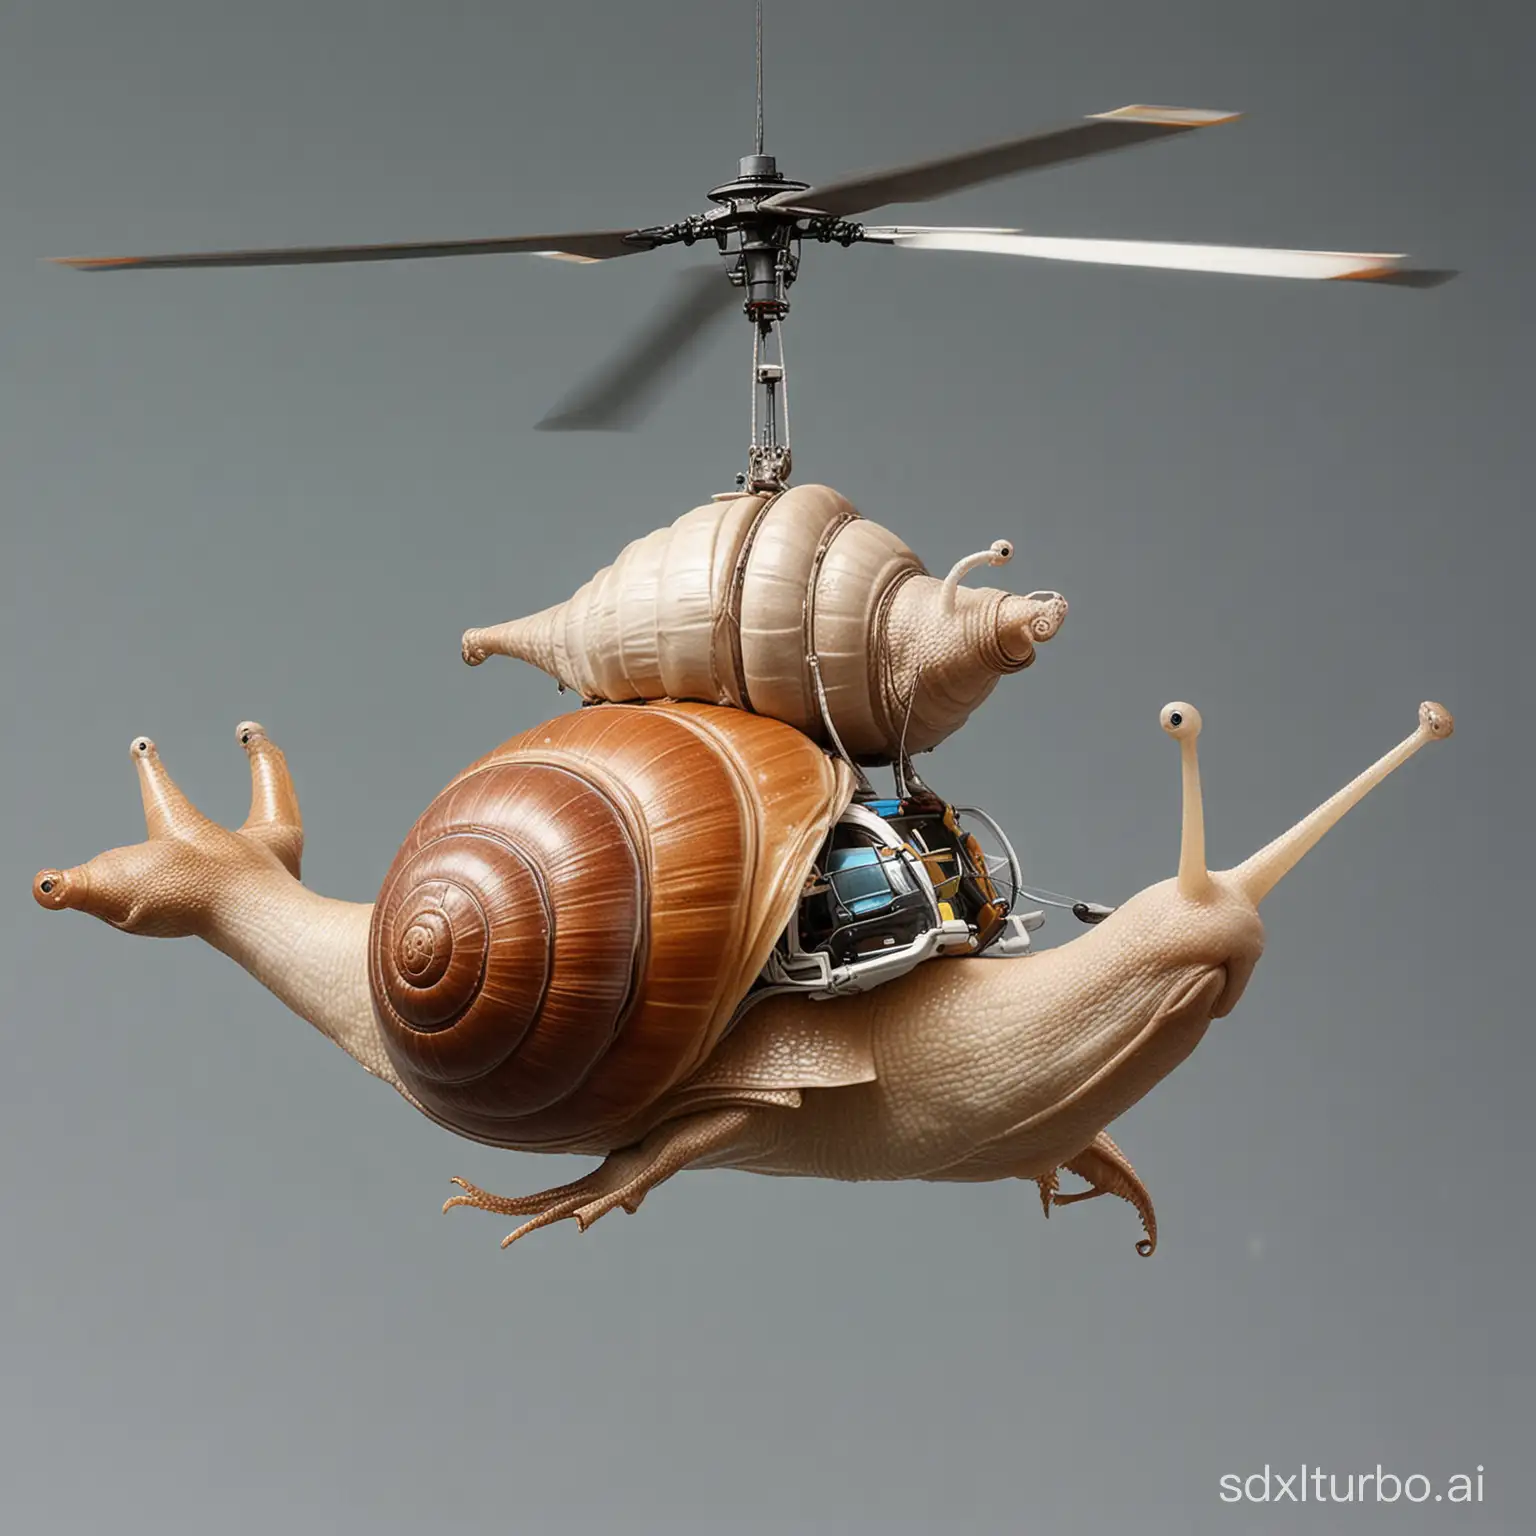 Giant-Snail-Carrying-Windbeutel-with-Helicopter-Wings